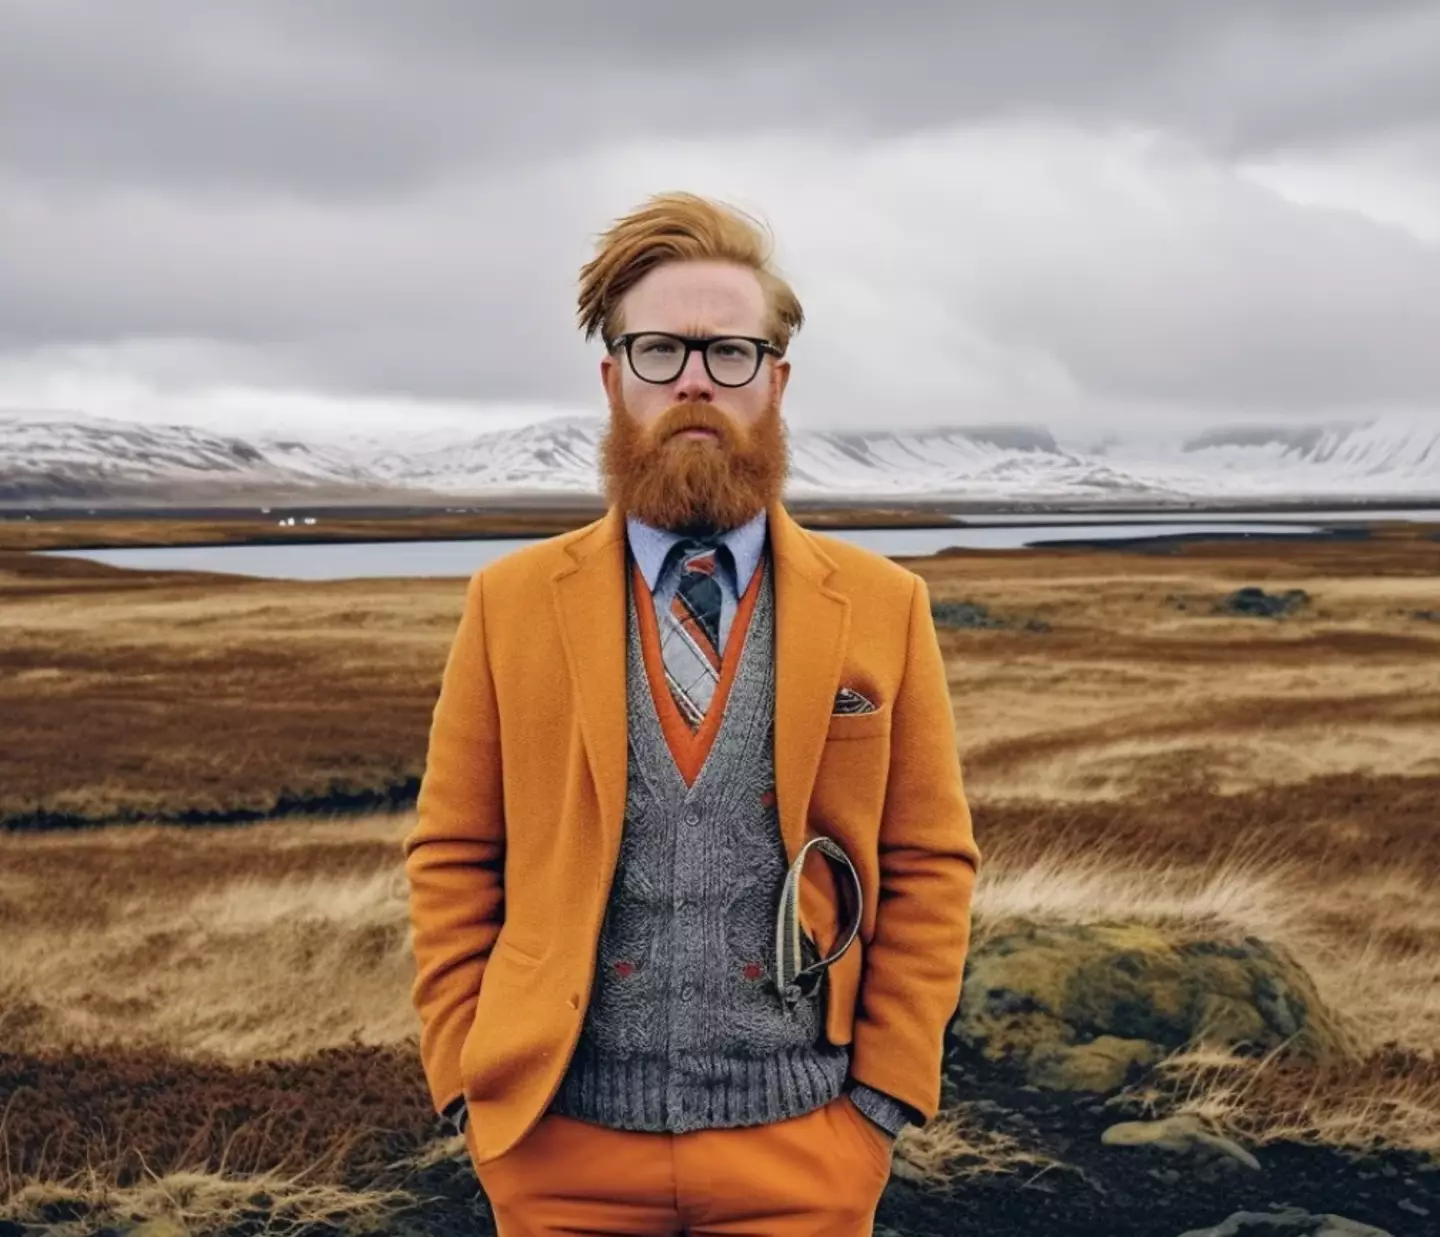 Iceland's 'most stereotypical person' according to AI.